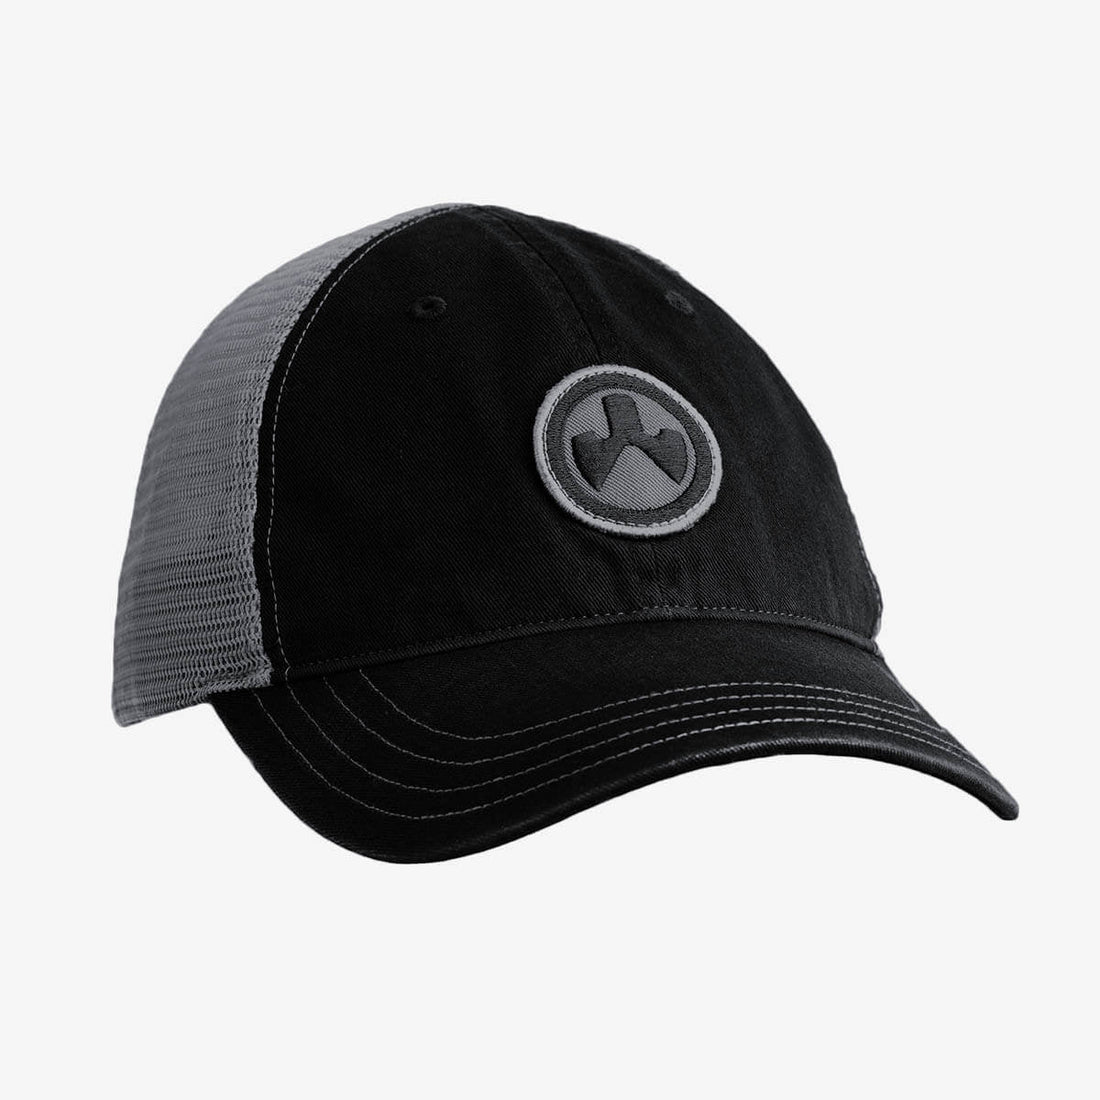 Apparel - Head - Hats - Magpul Icon Patch Garment Washed Trucker Hat